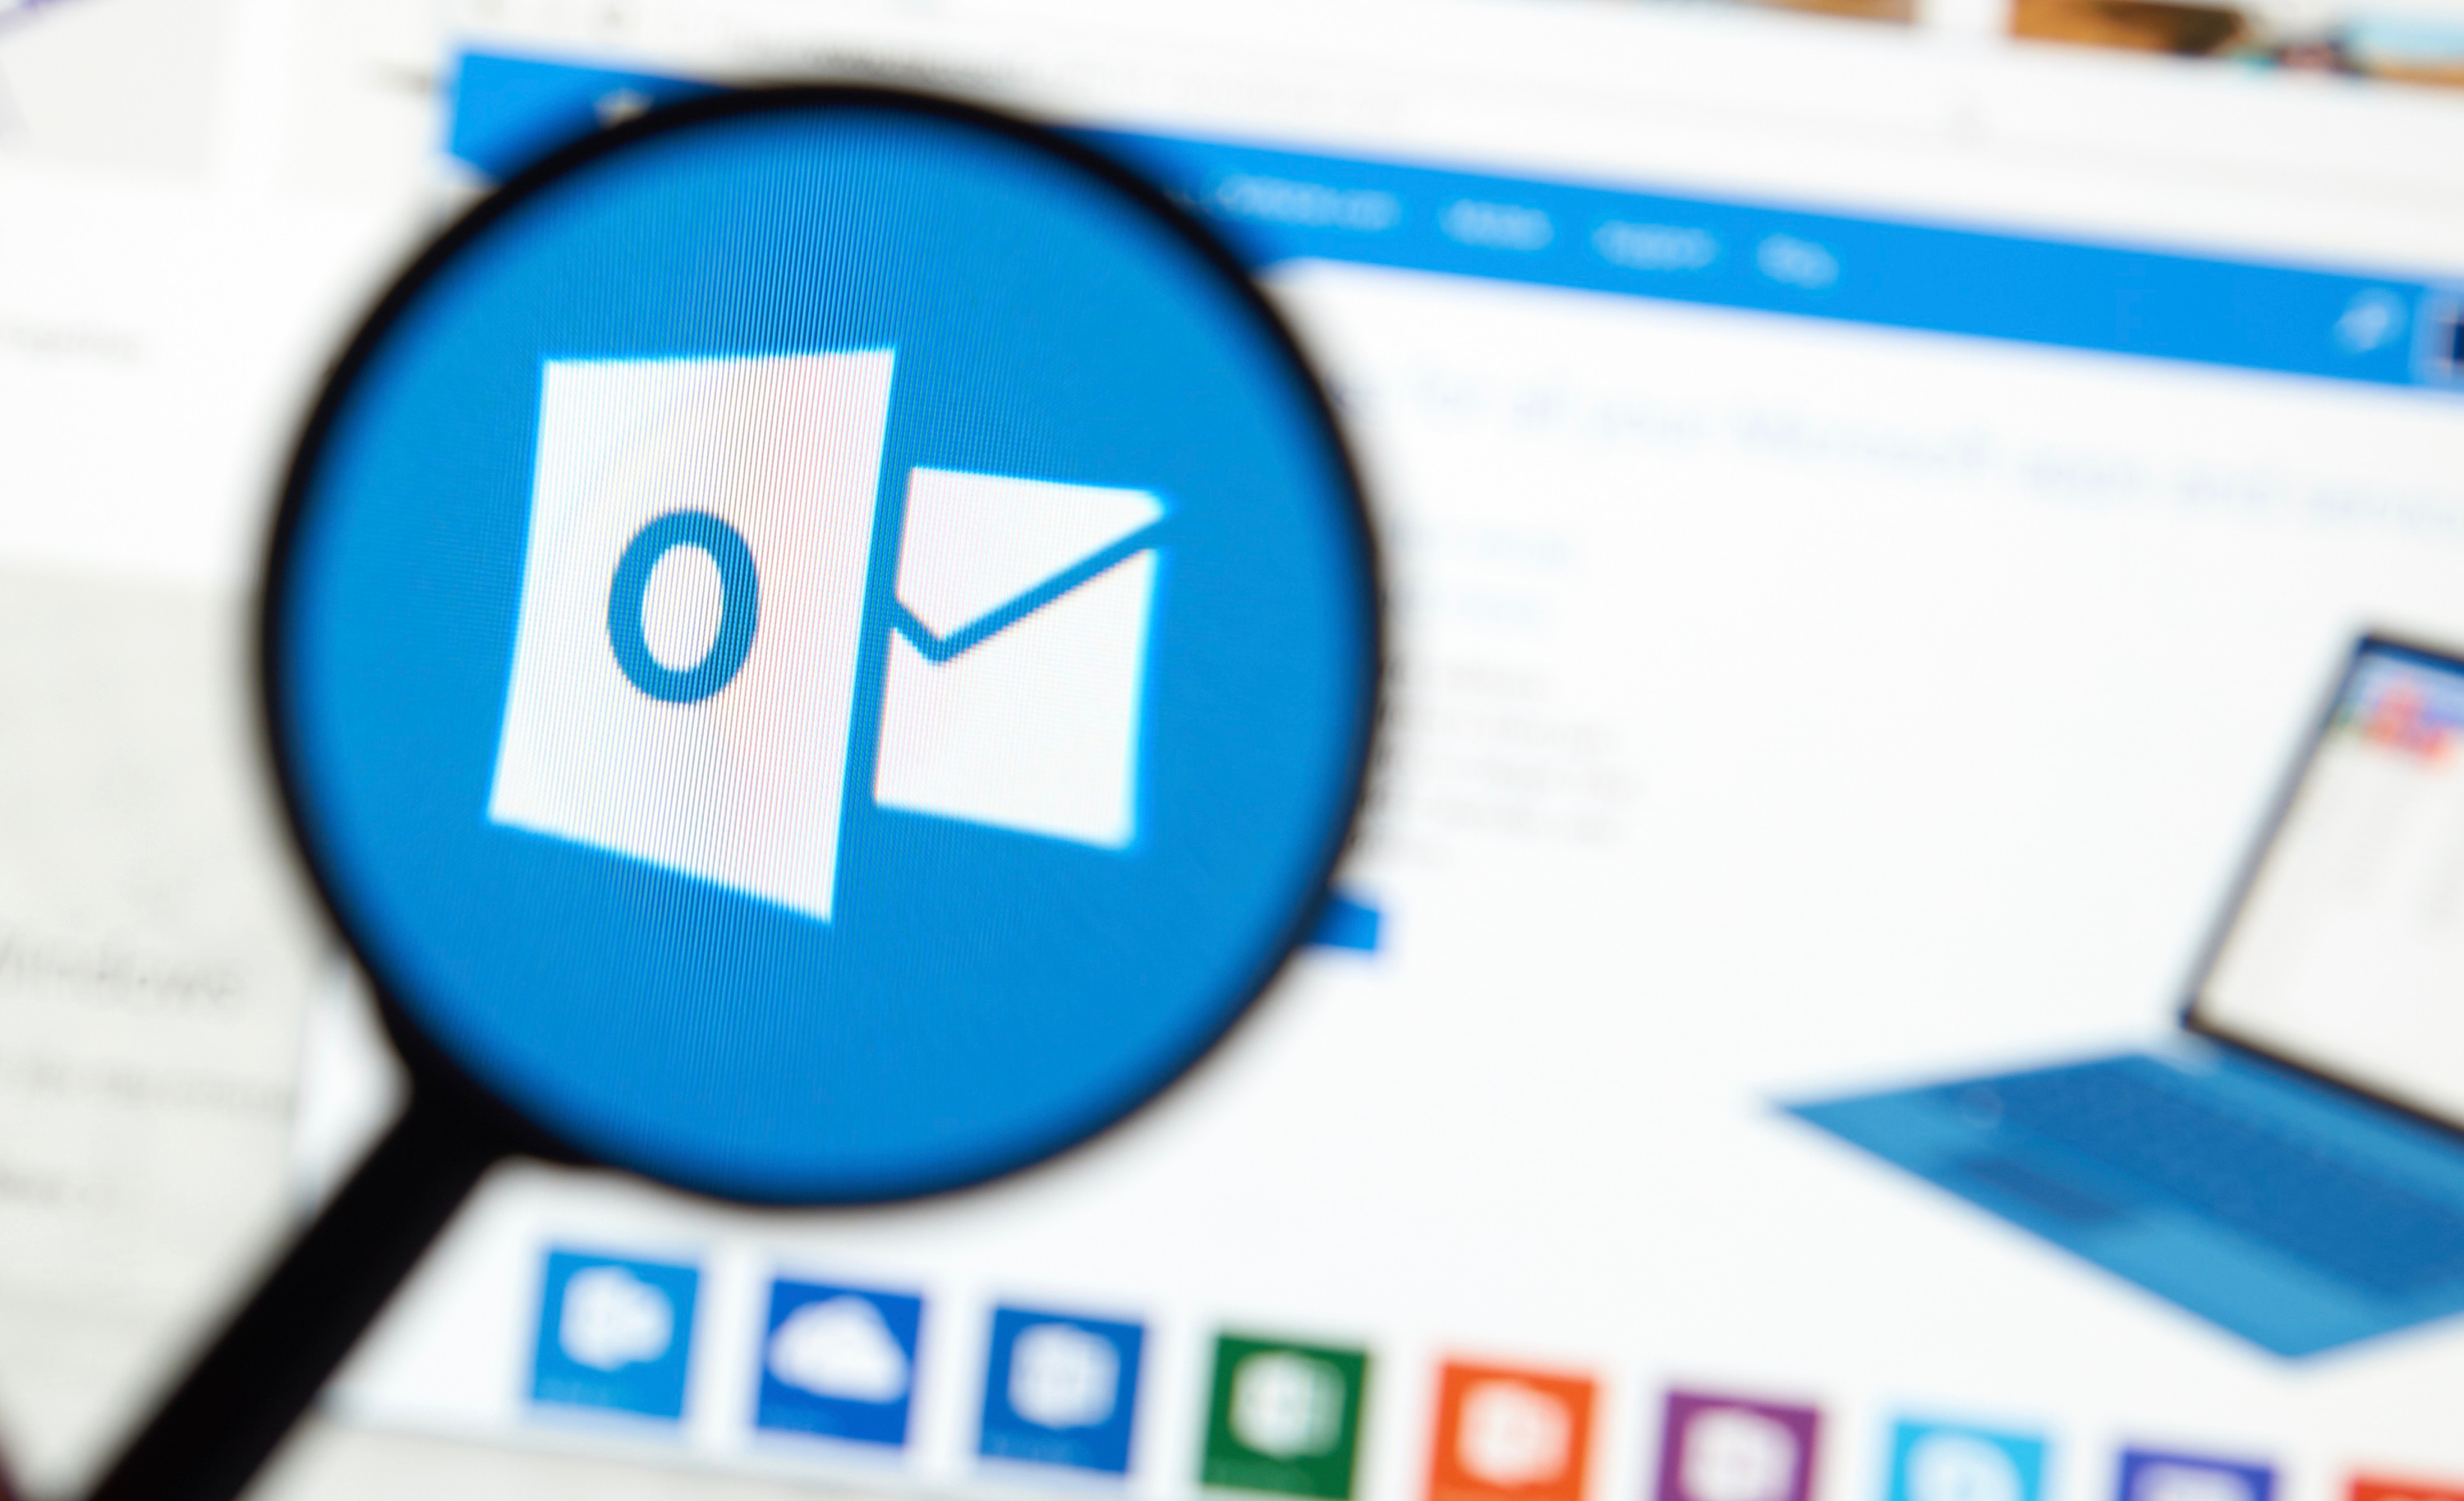 How to send a calendar invite in Outlook in 5 simple steps